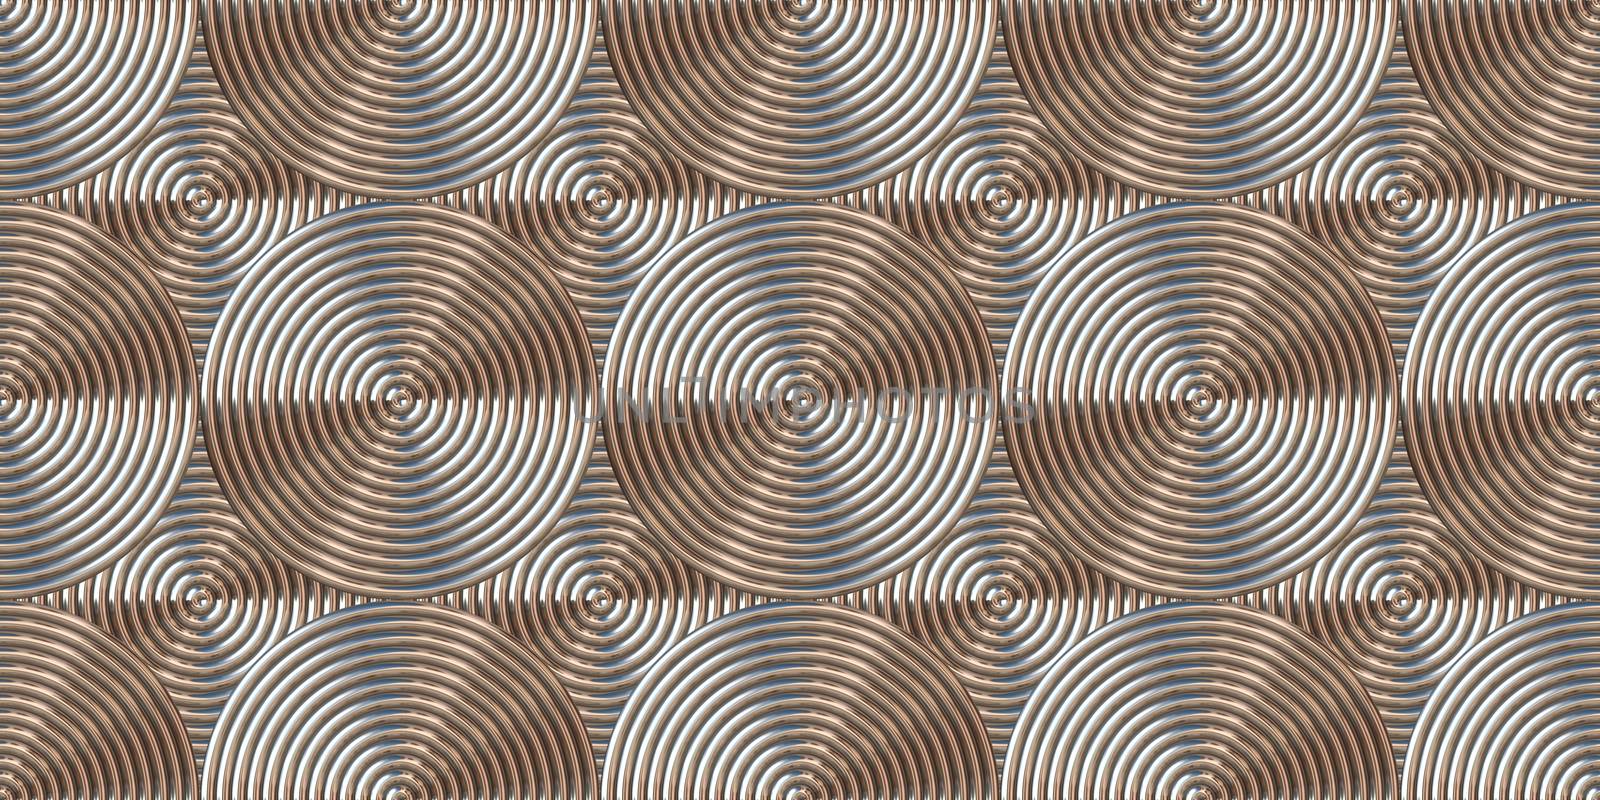 Chrome art deco seamless texture. Vintage silver rings background. Metal circles pattern. by sanches812